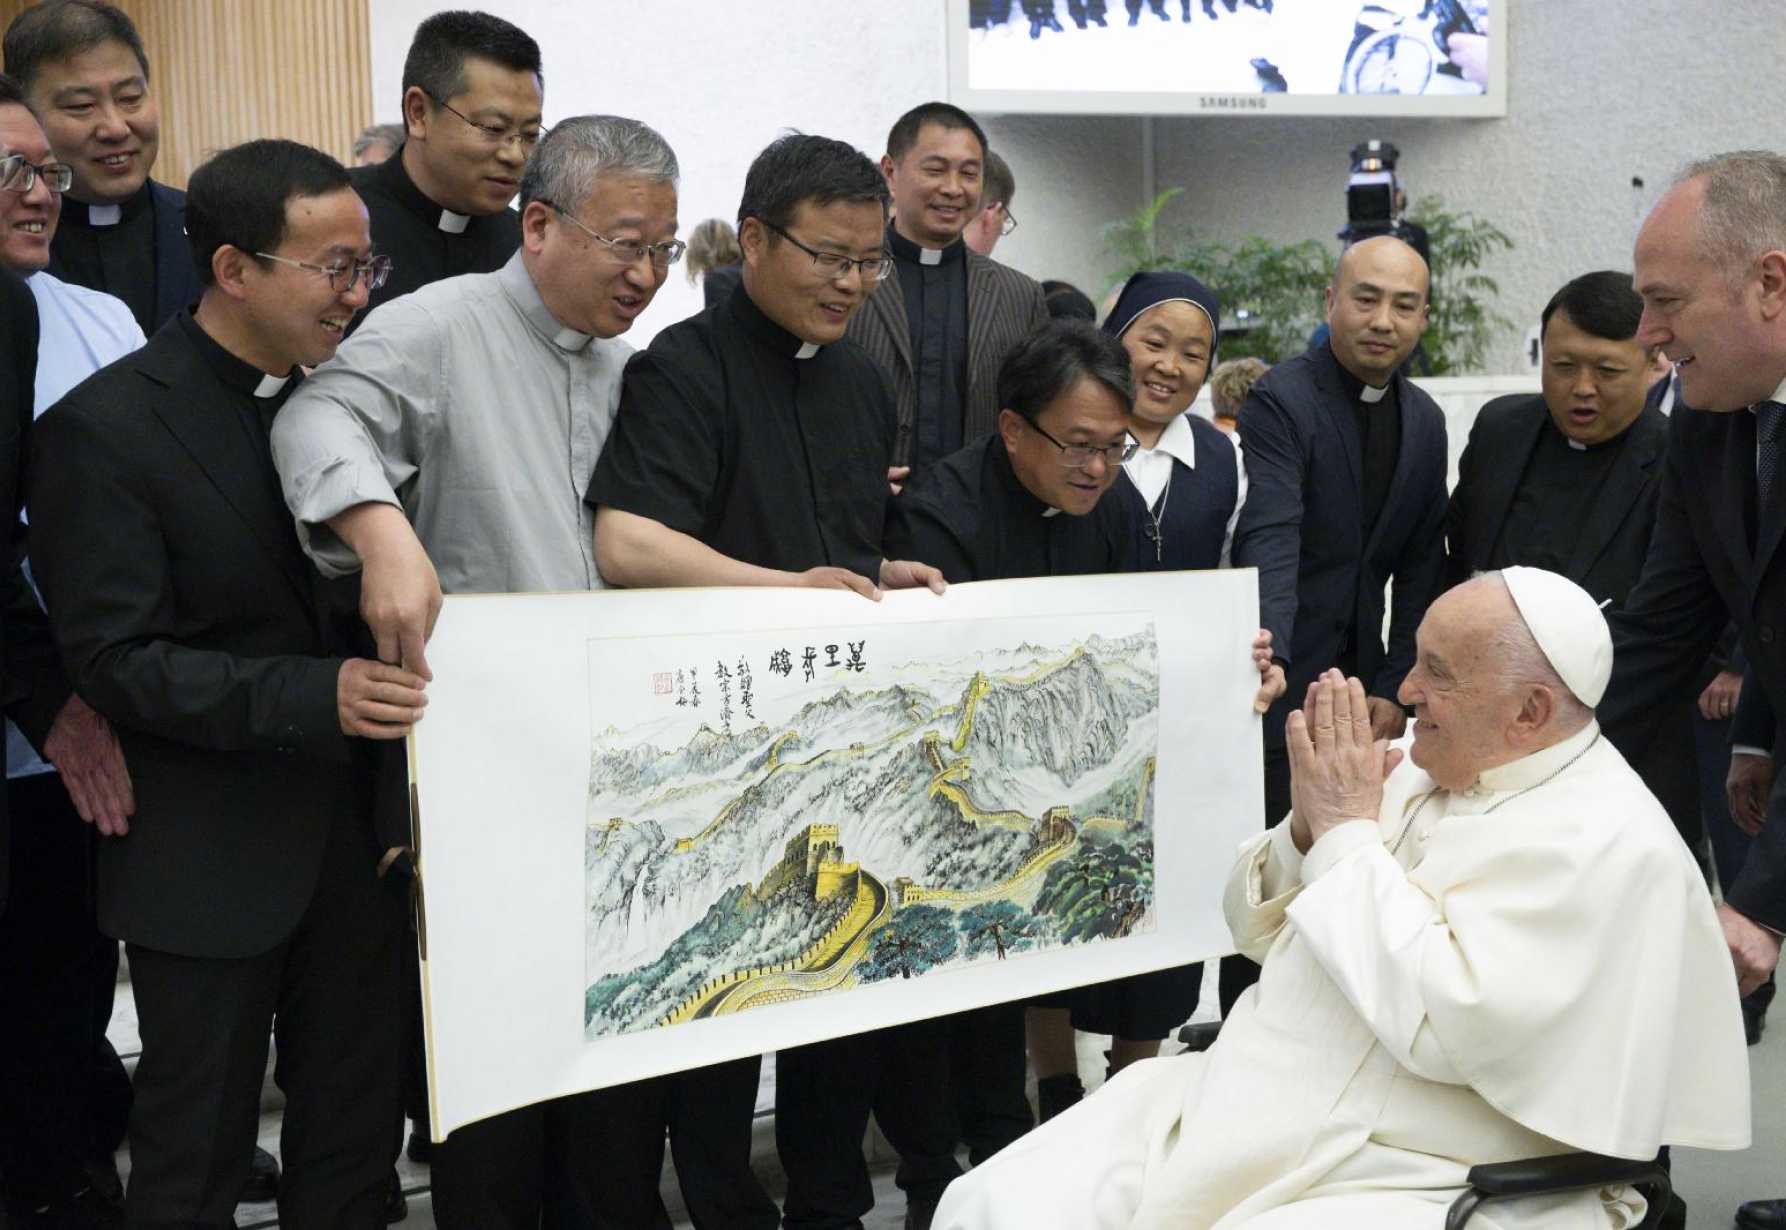 Pope says faith in China has been safeguarded by God